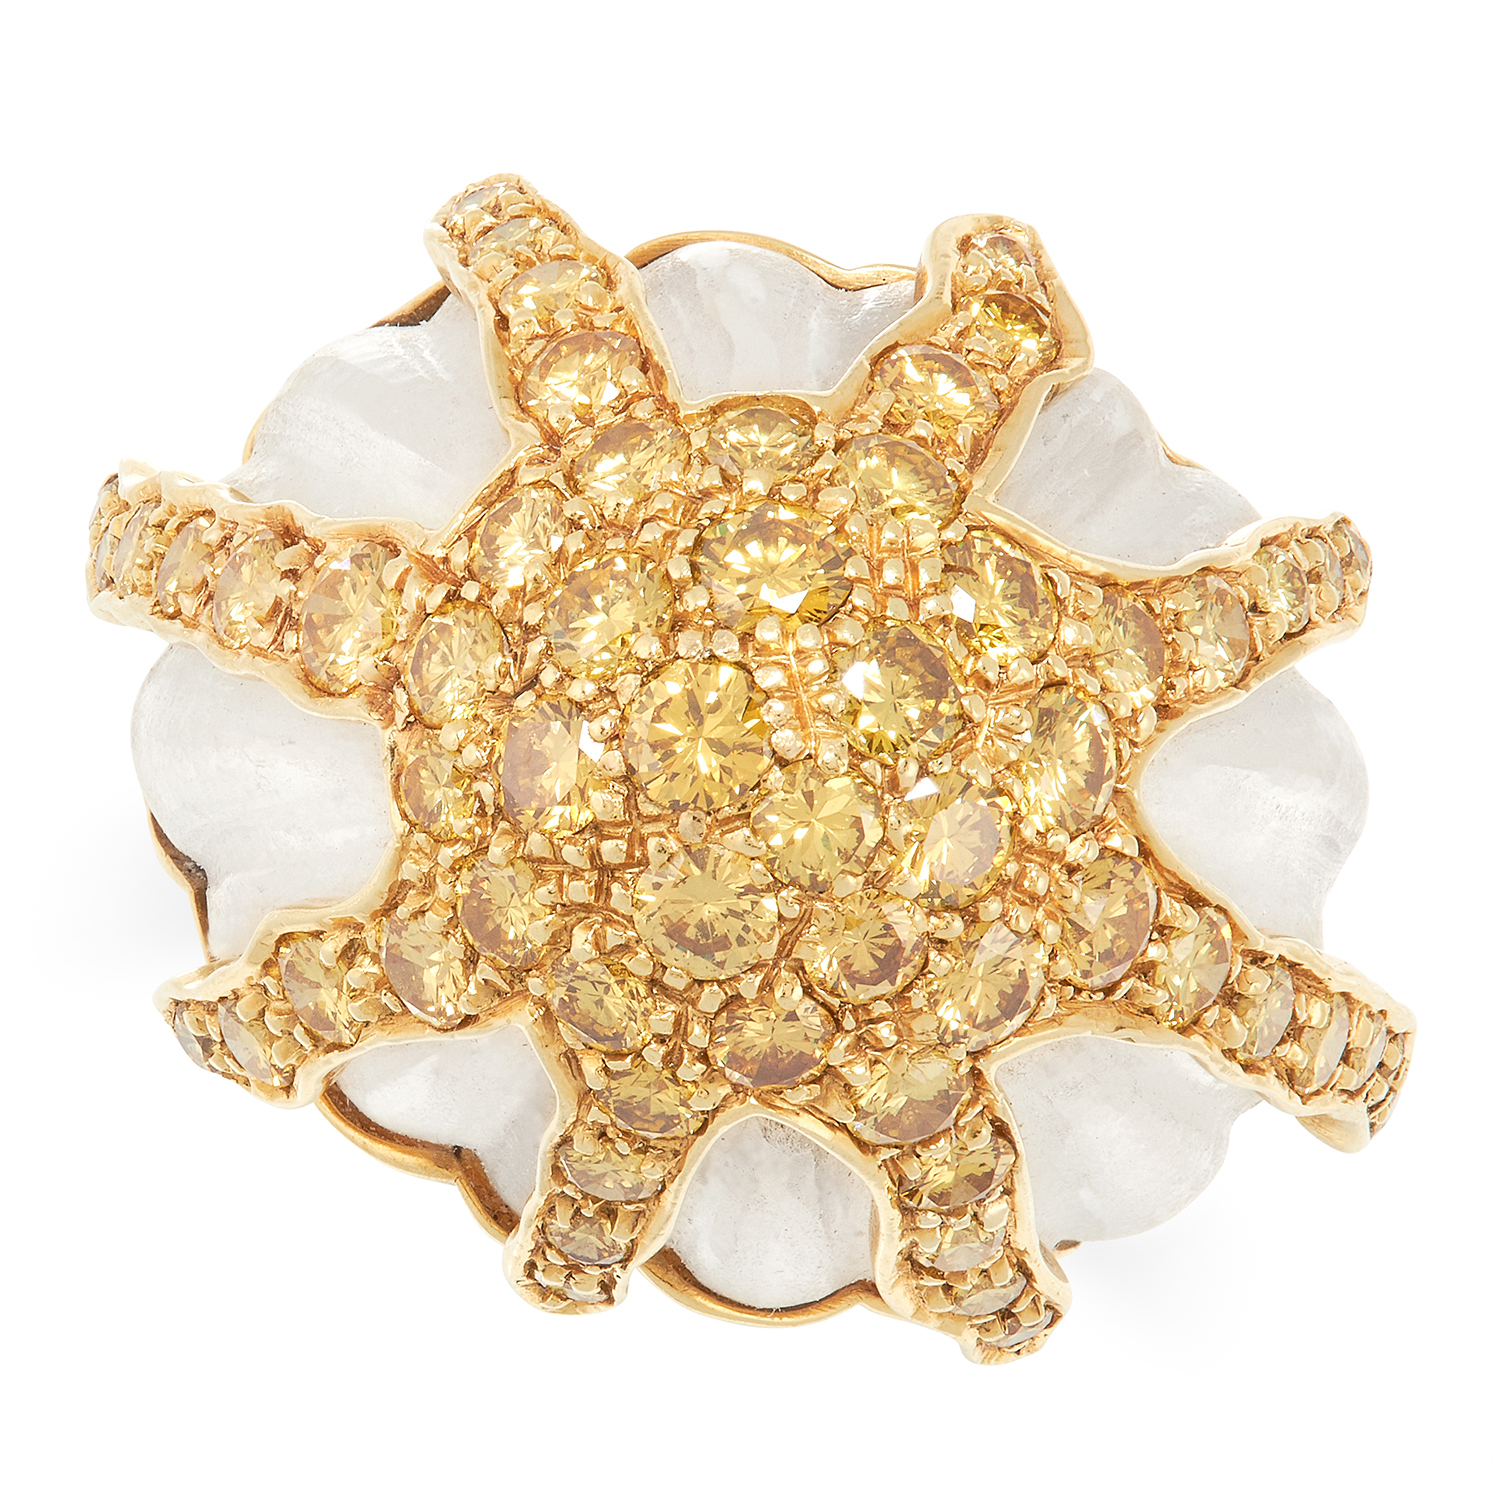 A YELLOW DIAMOND AND ROCK CRYSTAL RING designed as a lobed carved piece of rock crystal with frosted